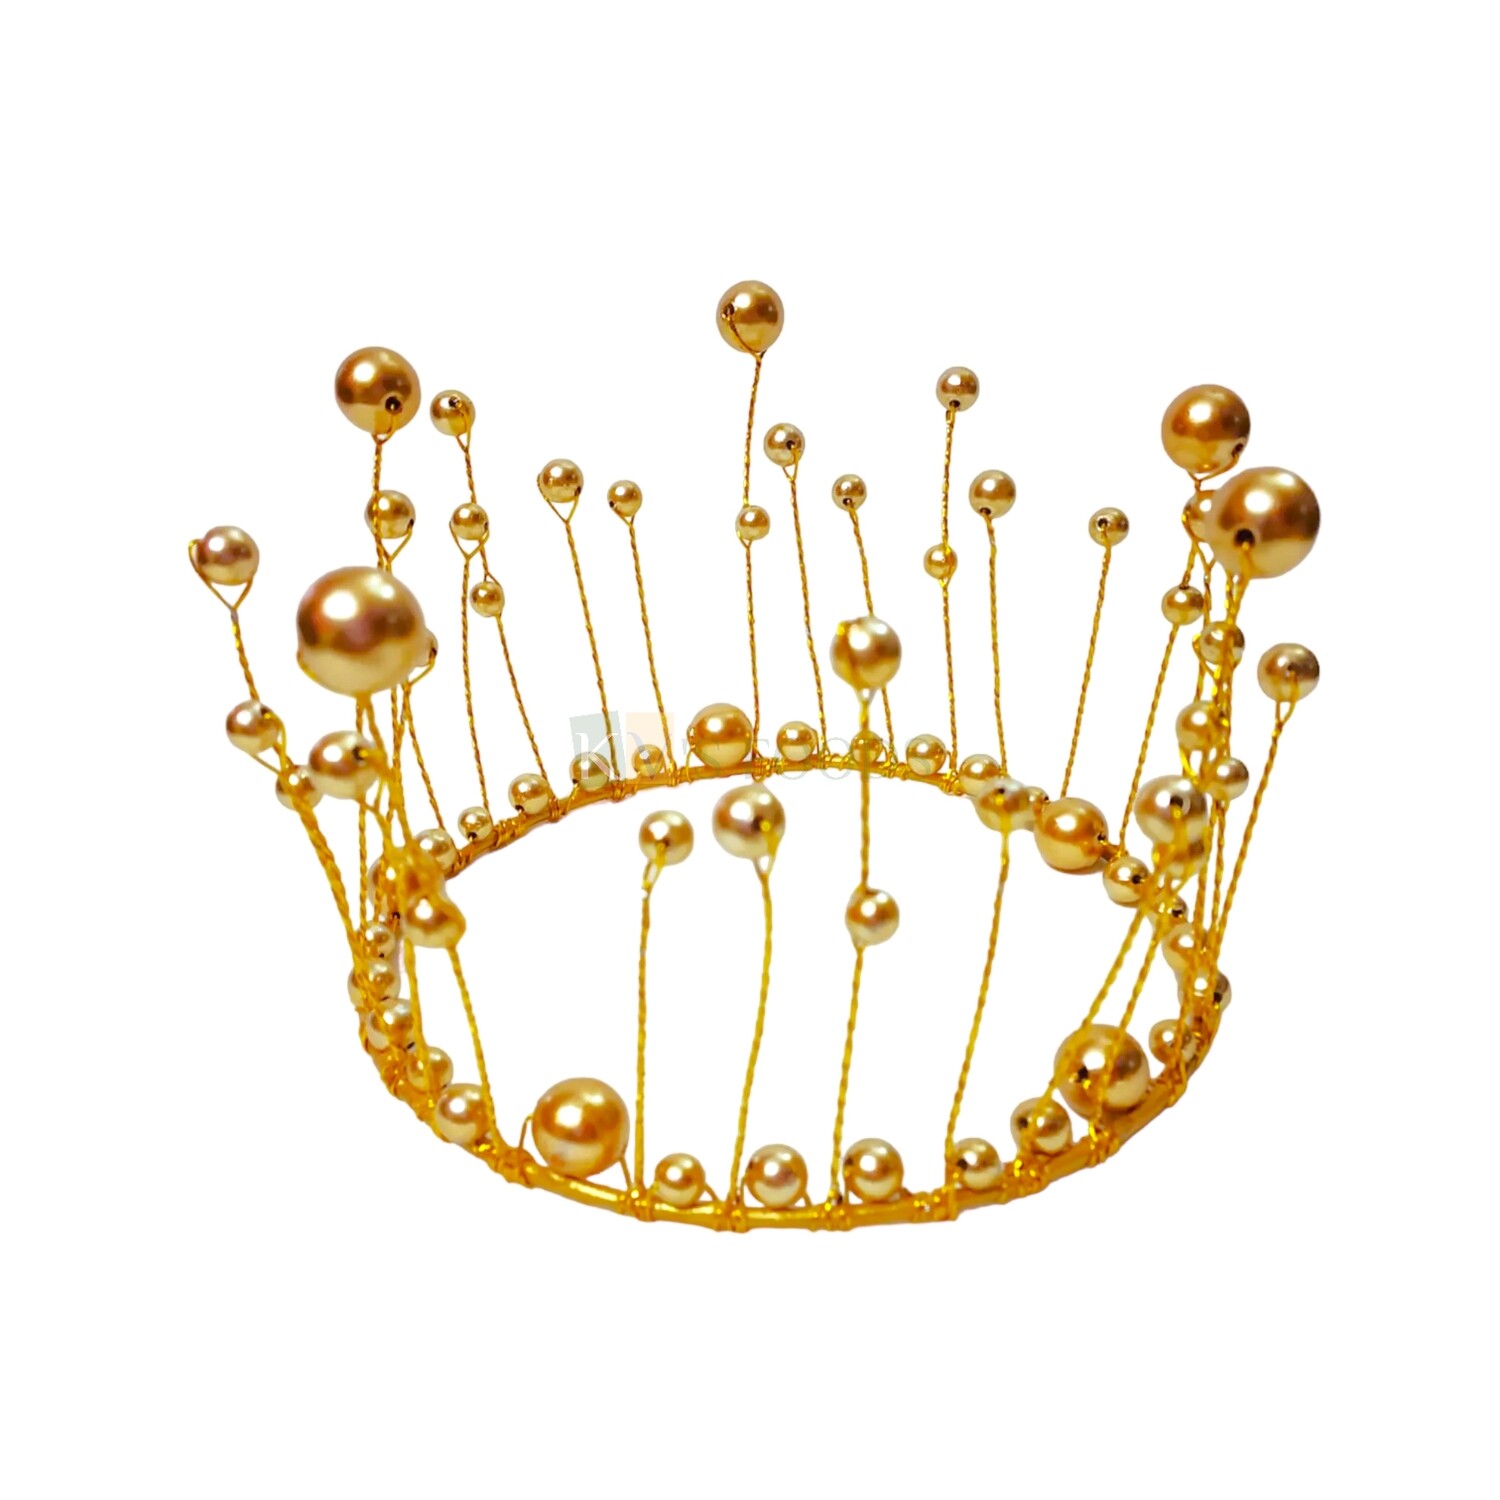 1PC Golden Wire Flexible Crown with Golden Shiny Glitter Balls Tiara Crown Cake Topper, Adjustable Wire Shape Princess Crown Tiara for Wedding Functional Cake Topper Cake Decoration Accessories